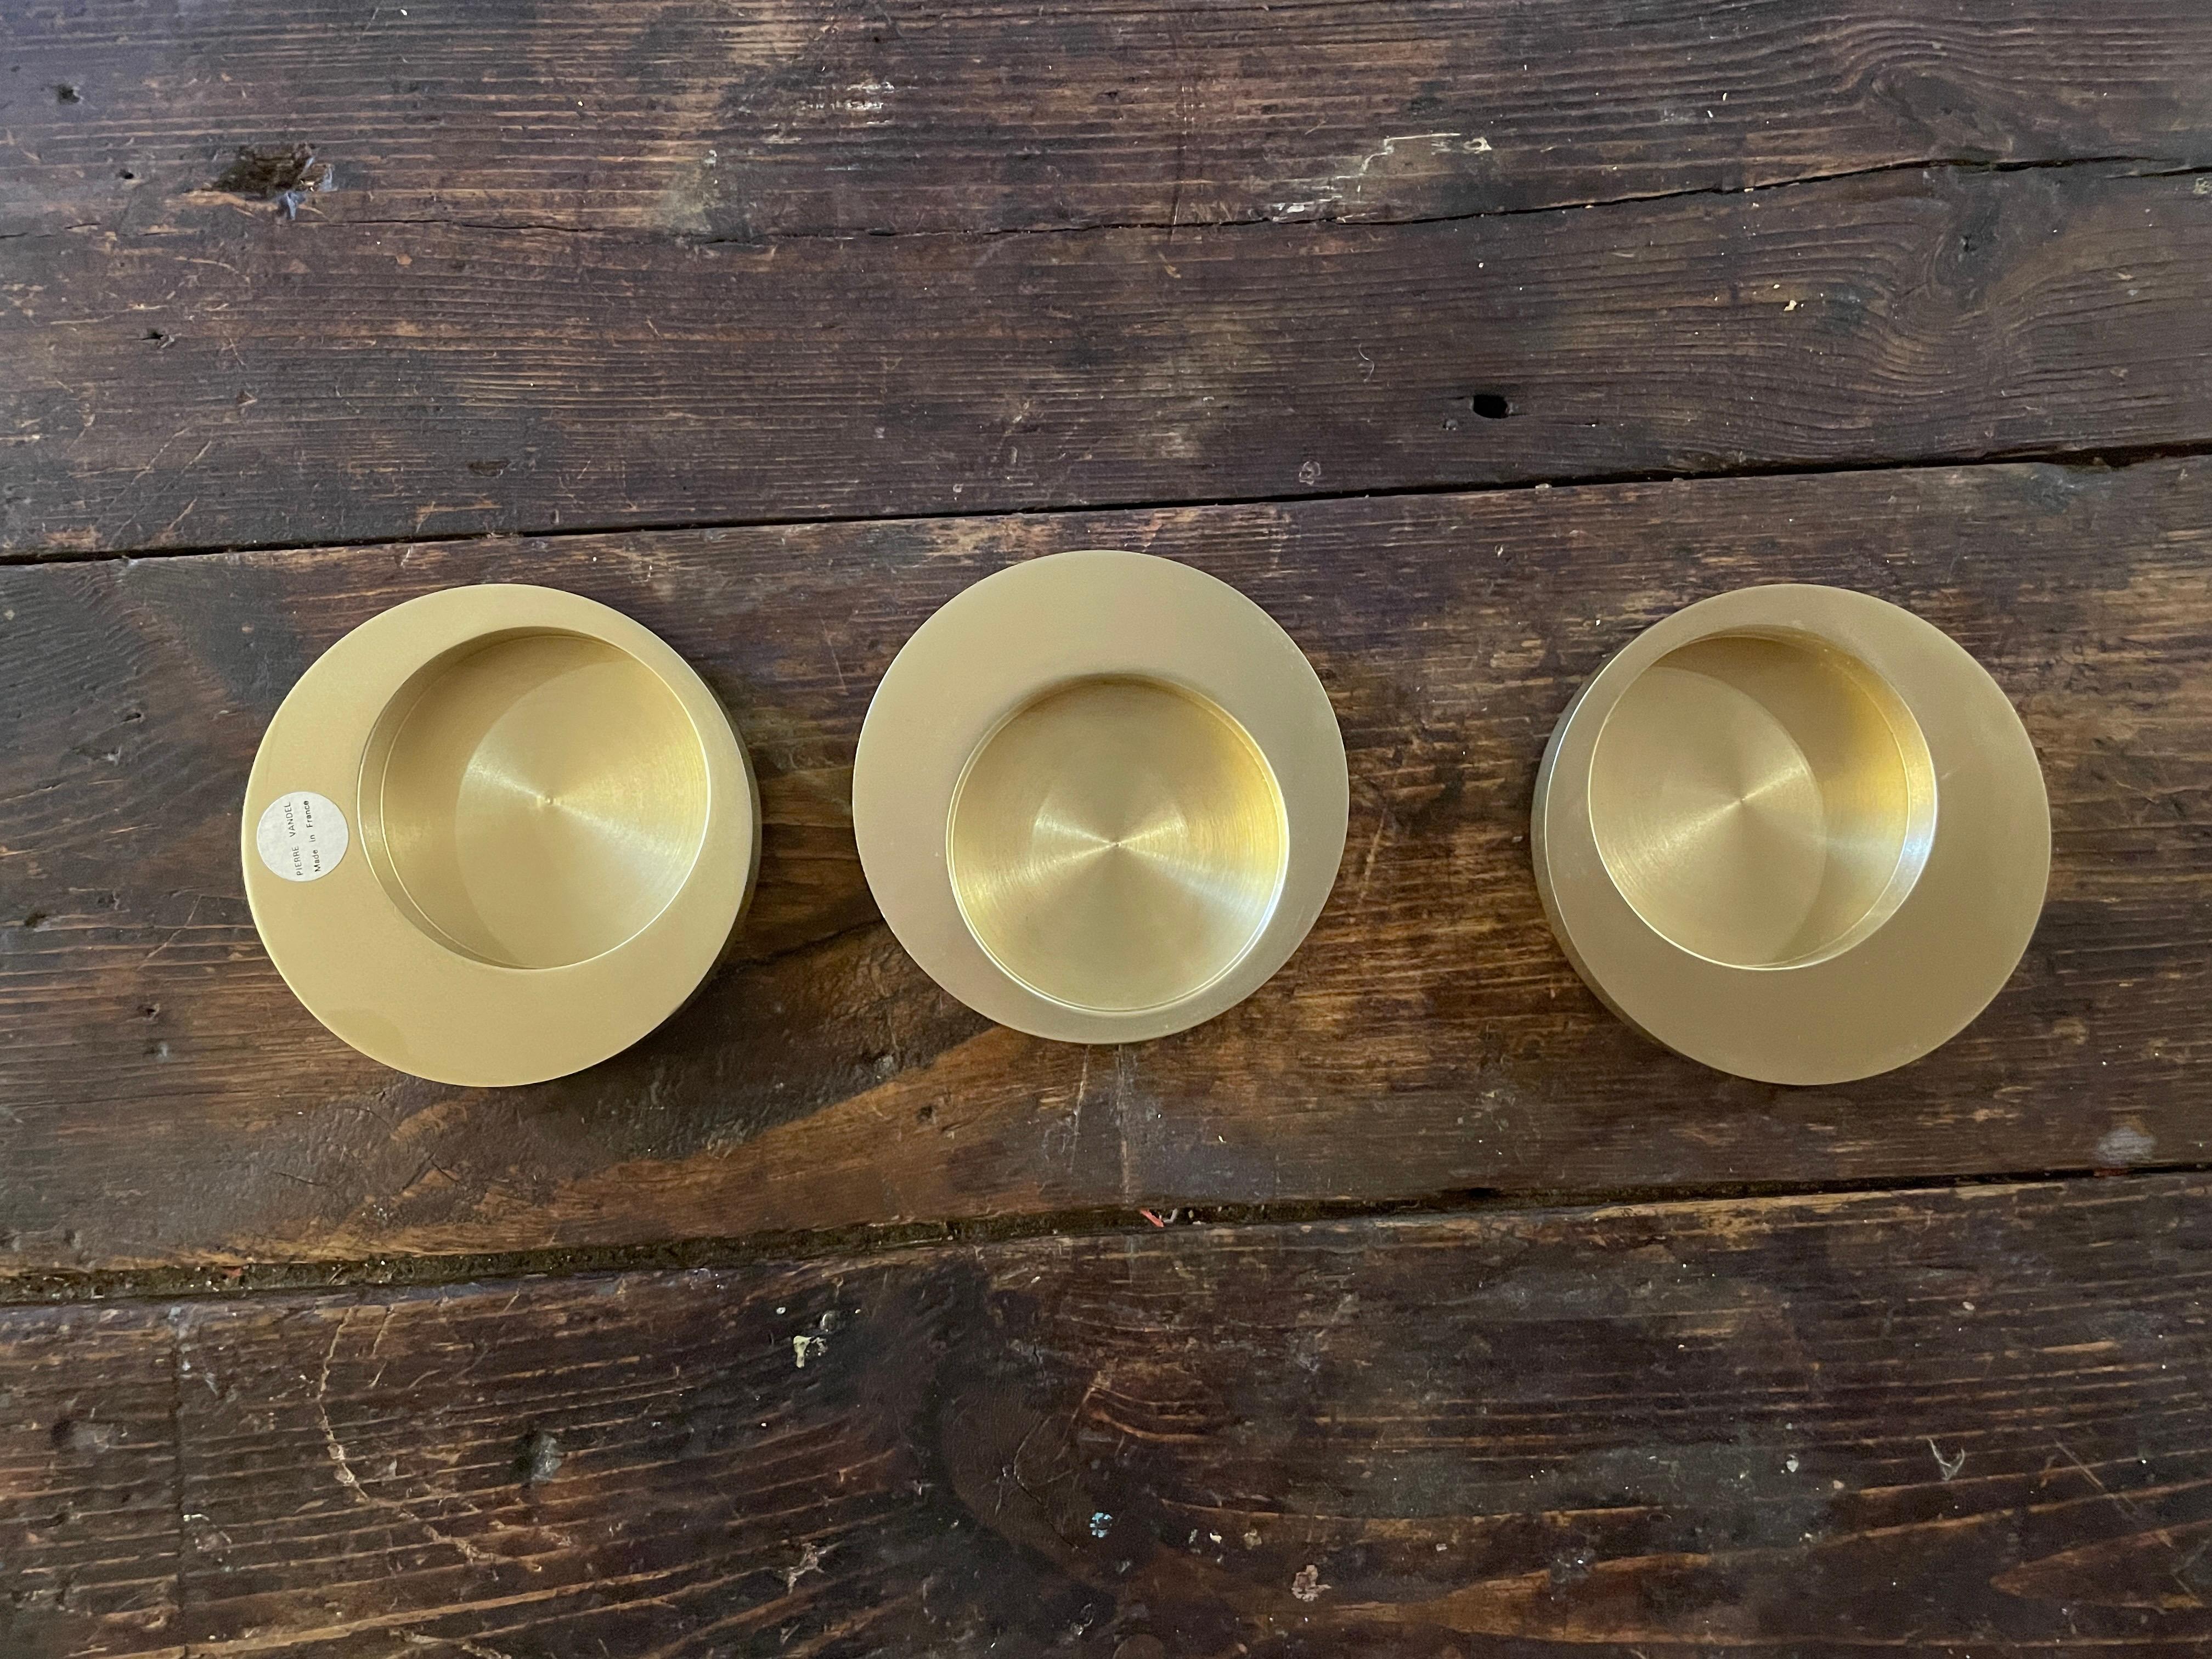 Set of 3 ashtrays-Desk tidies designed by Pierre Vandel . 1970s . France. Brass. 
Good condition.
In the style of;
Willy rizzo 
Gabriela Crespi
Roméo rega
Gold.
Mid-Century Modern. Vintage furniture. Italian design. 1970s. Rosenthal. Germany. Willy